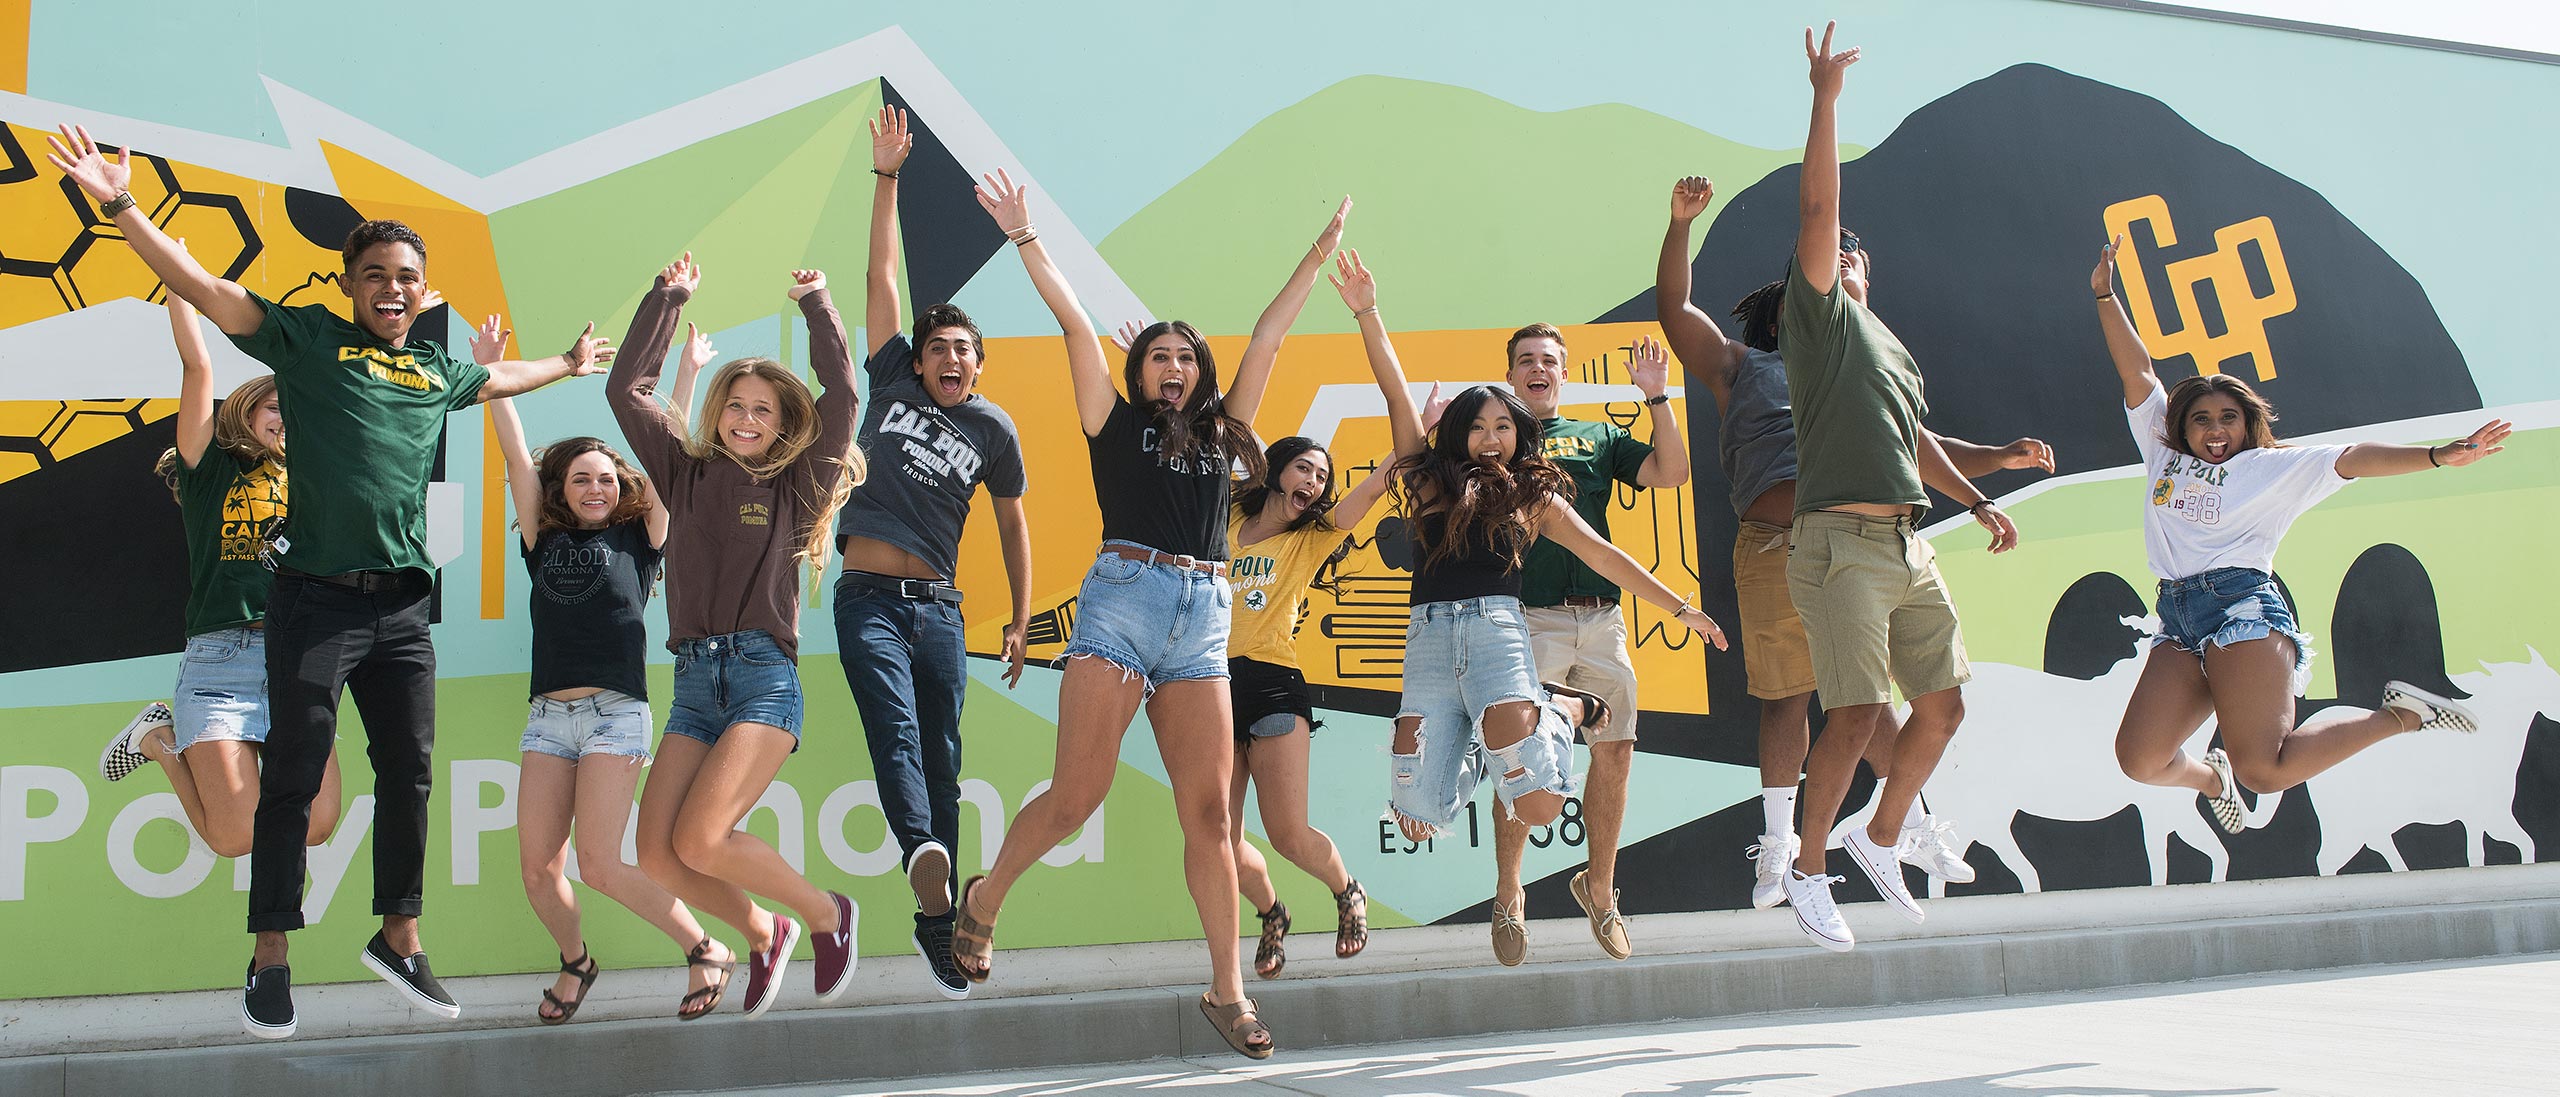 Student Jumping in Front of CPP Mural